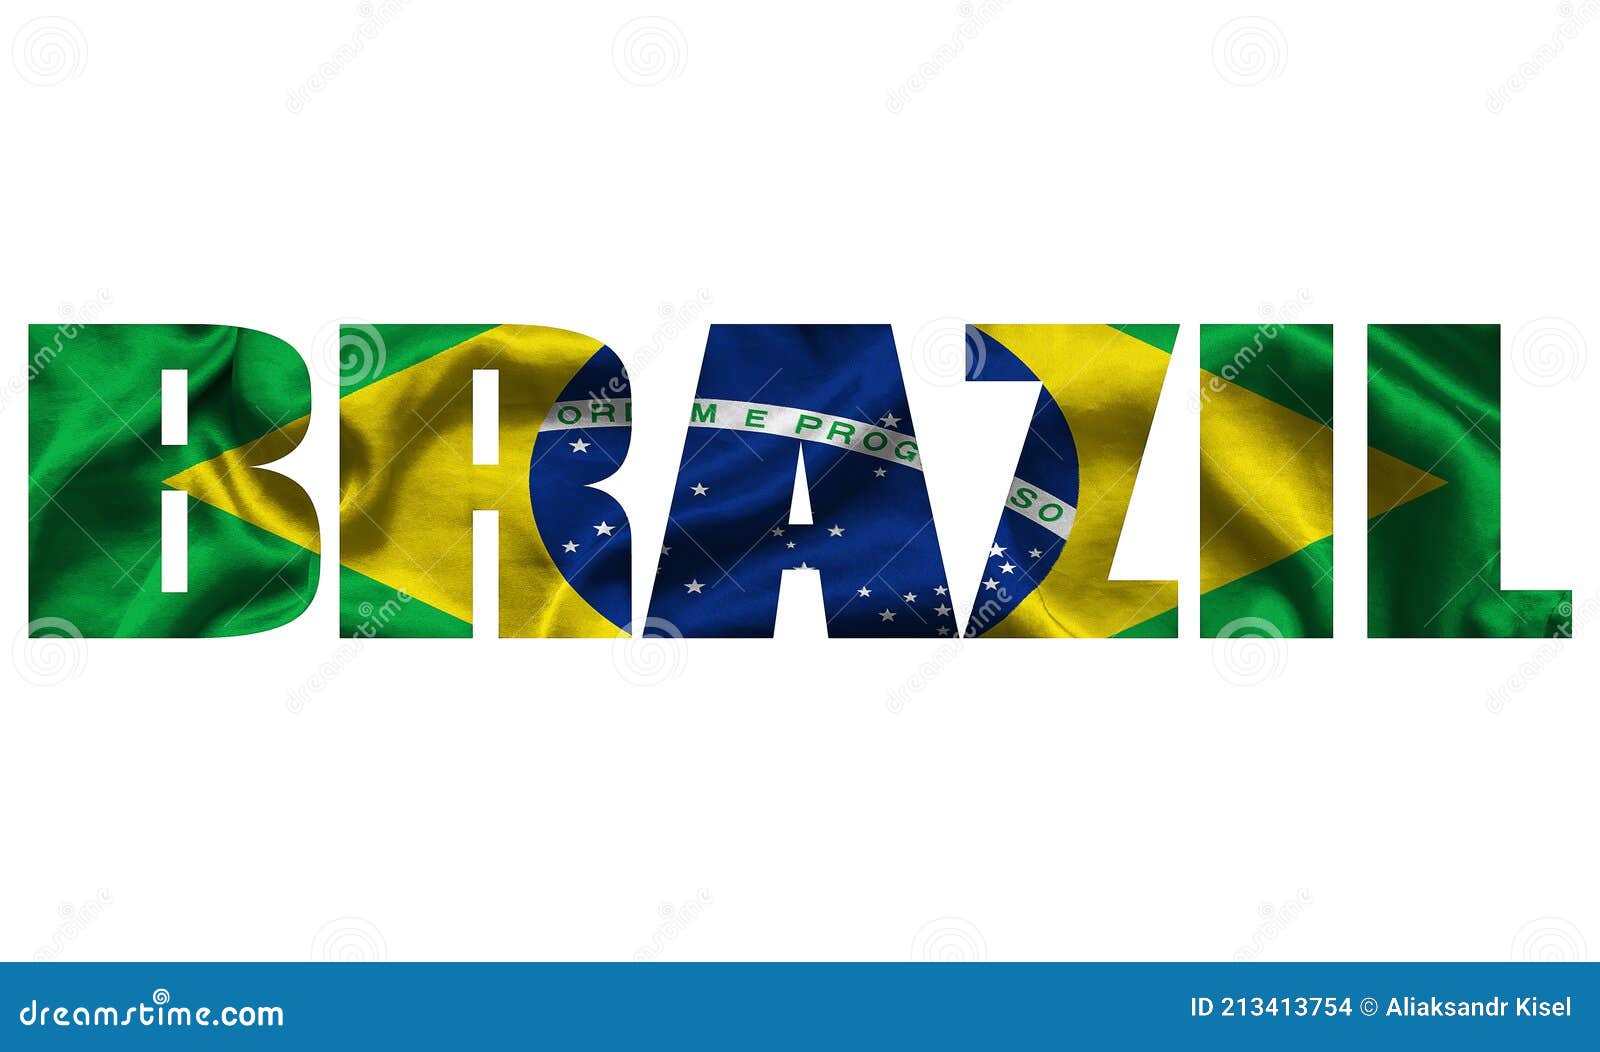 The Word Brazil in the Colors of the Waving Brazilian Flag ...